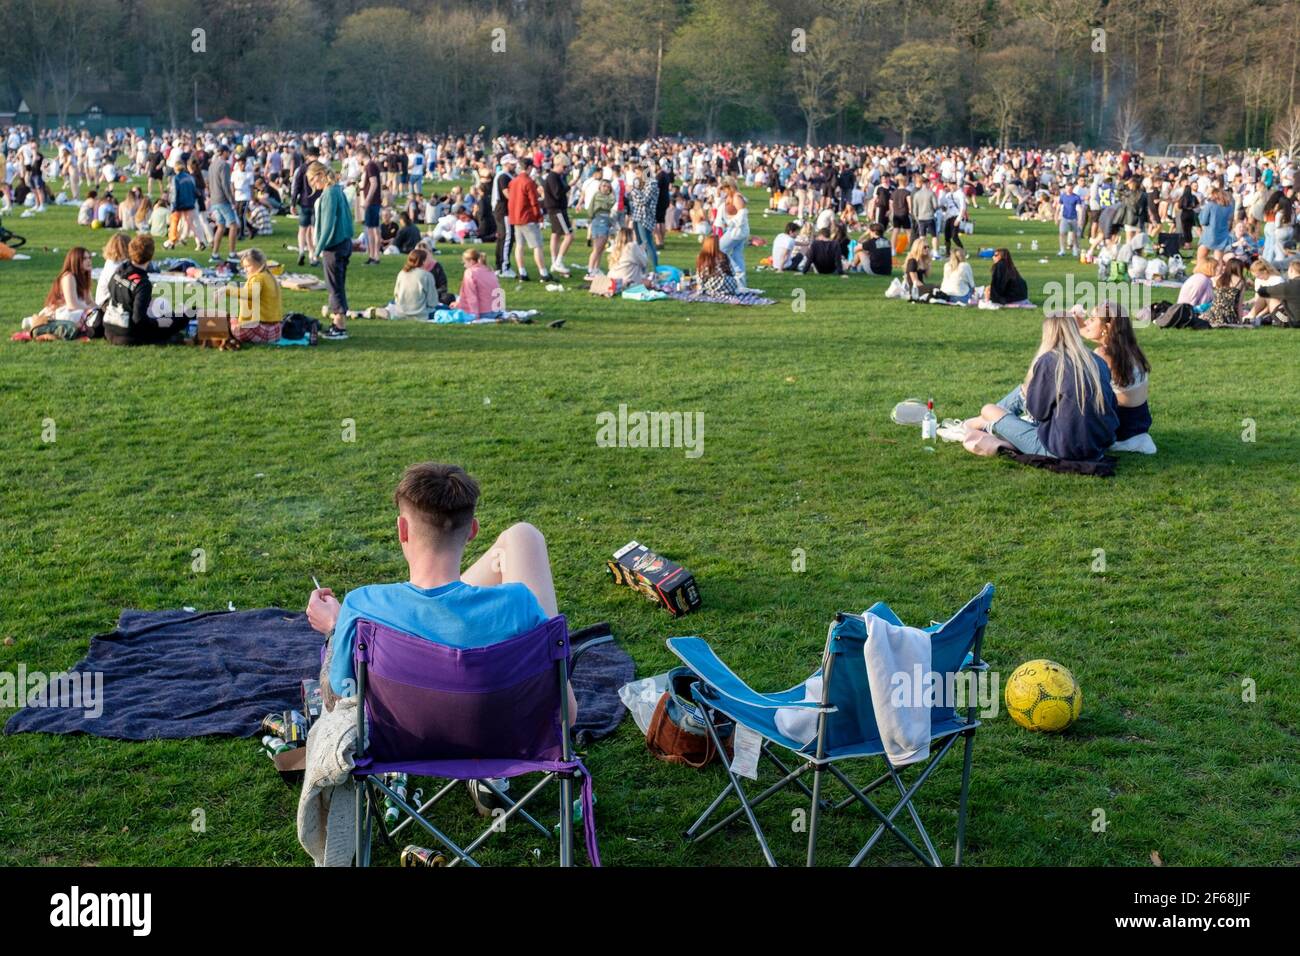 Sheffield, UK. 30th Mar, 2021. Hundreds of young people enjoy a warm spring evening in Endcliffe Park, Sheffield, UK Credit: Mark Harvey/Alamy Live News Stock Photo